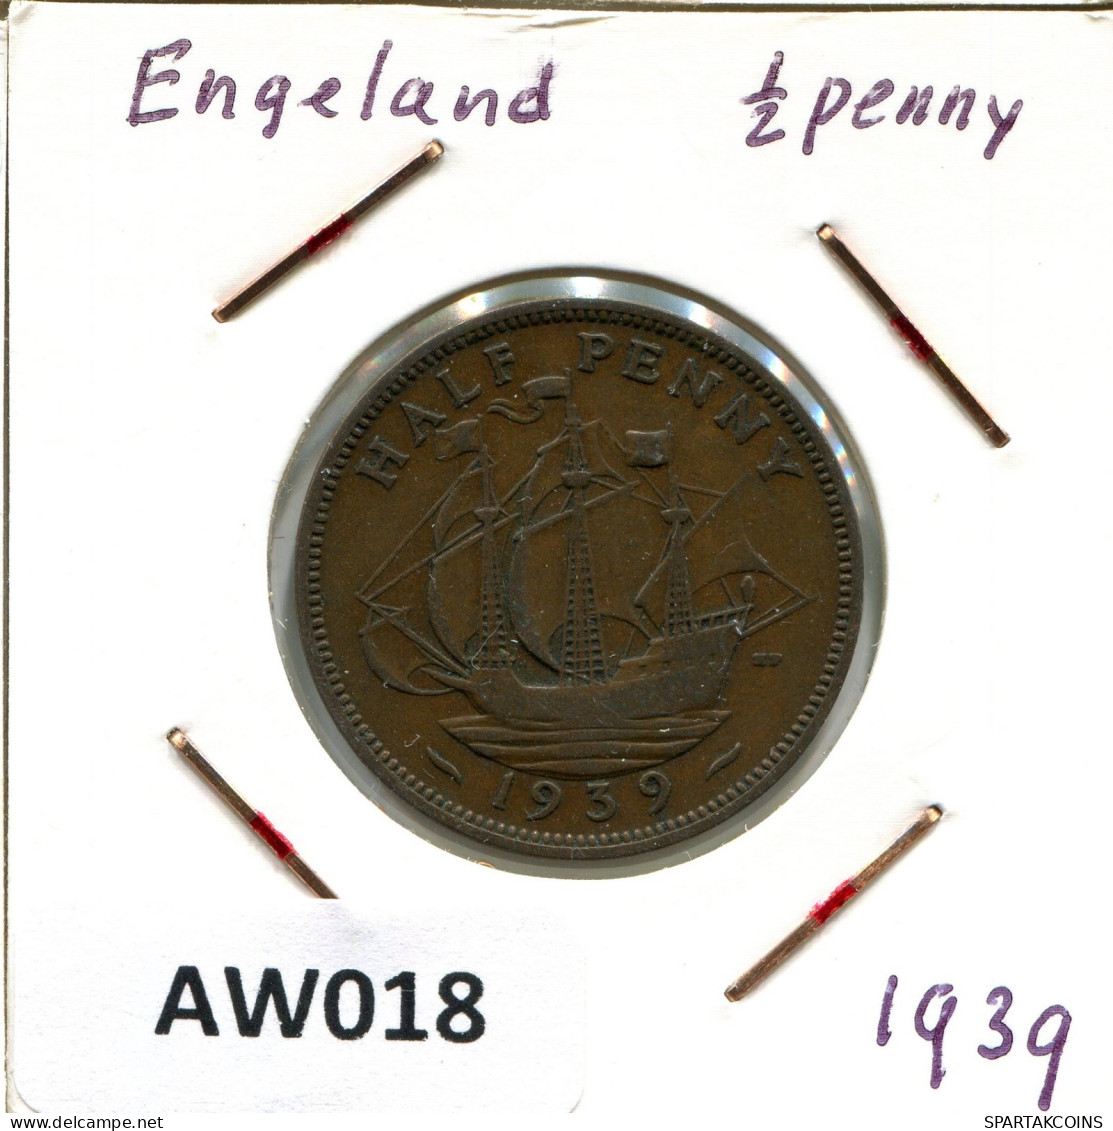 HALF PENNY 1939 UK GREAT BRITAIN Coin #AW018.U.A - C. 1/2 Penny